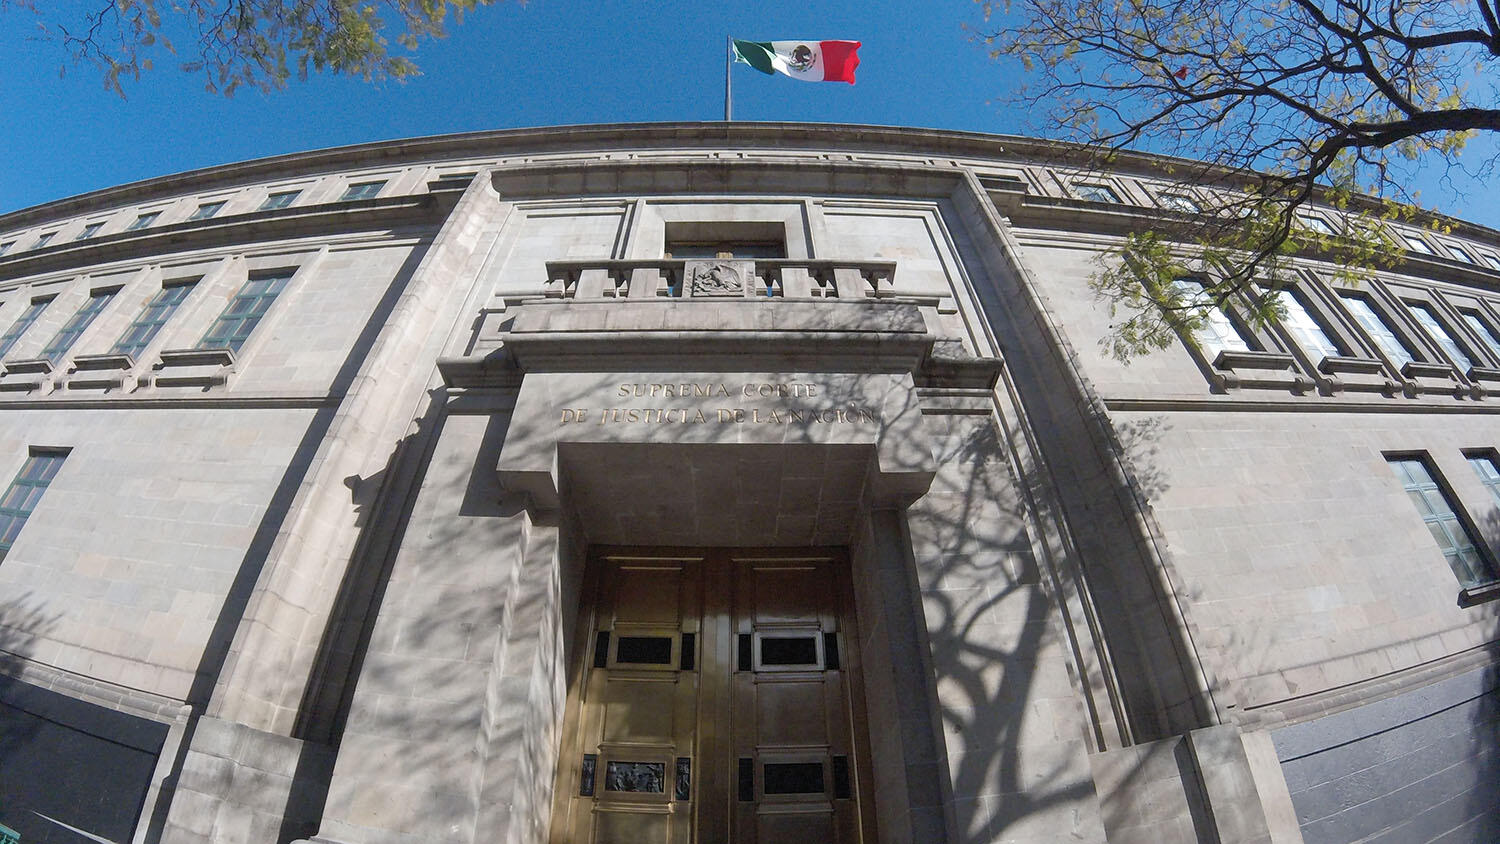 The entrance to the Supreme Court in Mexico City. (Photo by ProtoplasmaKid.)